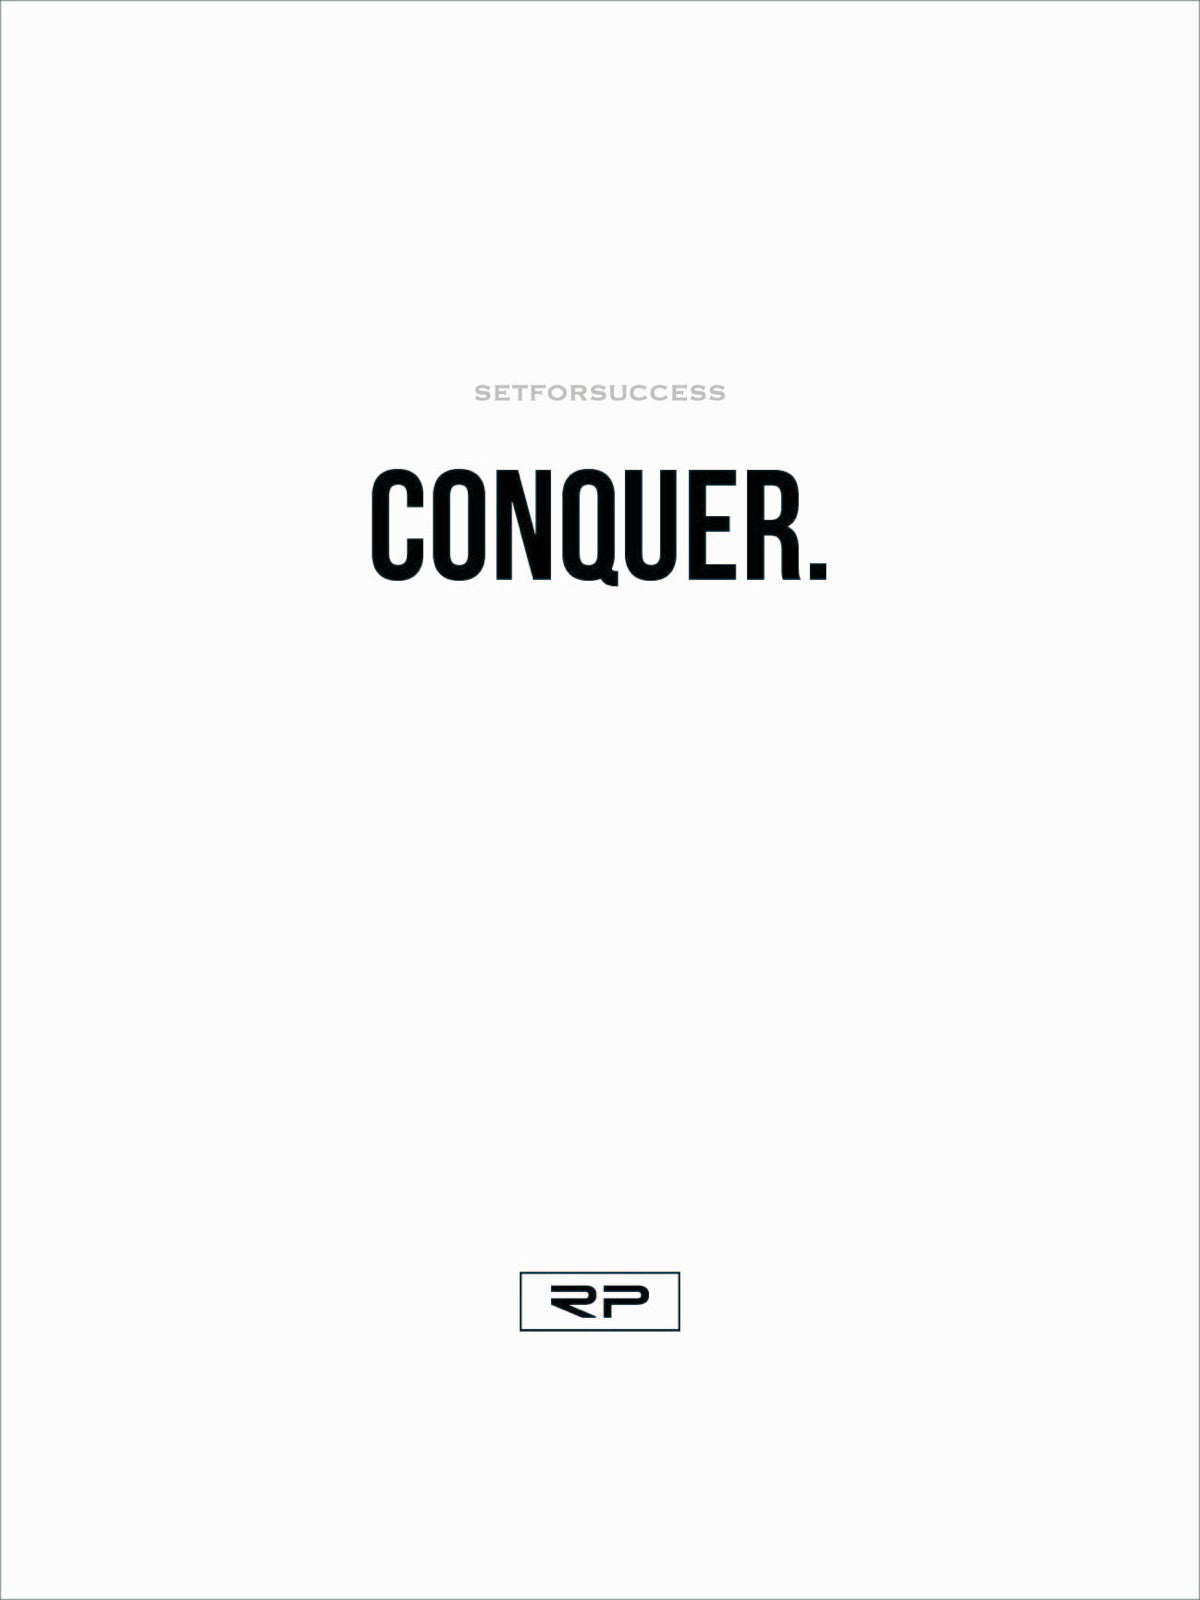 Conquer 1080P, 2K, 4K, 5K HD wallpapers free download | Wallpaper Flare